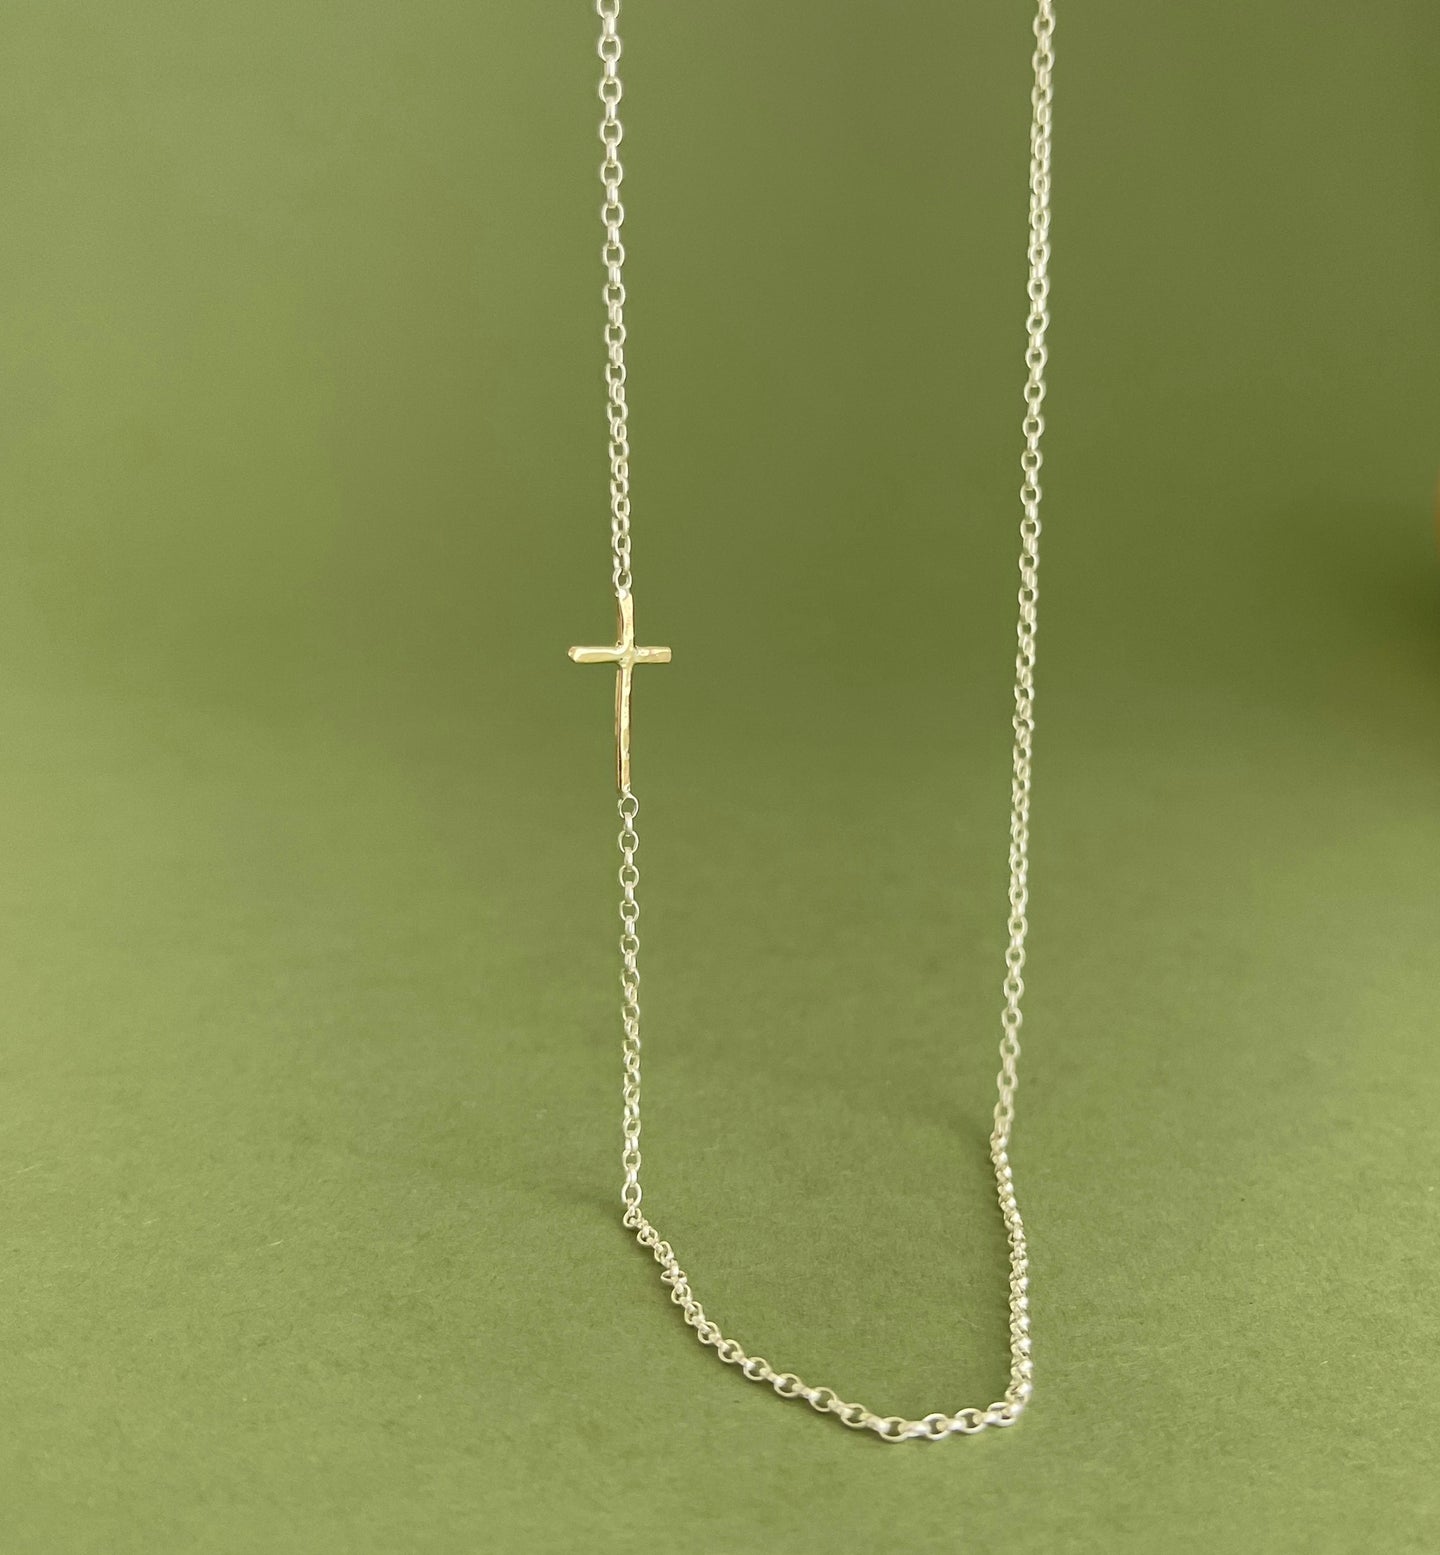 Gold cross necklace